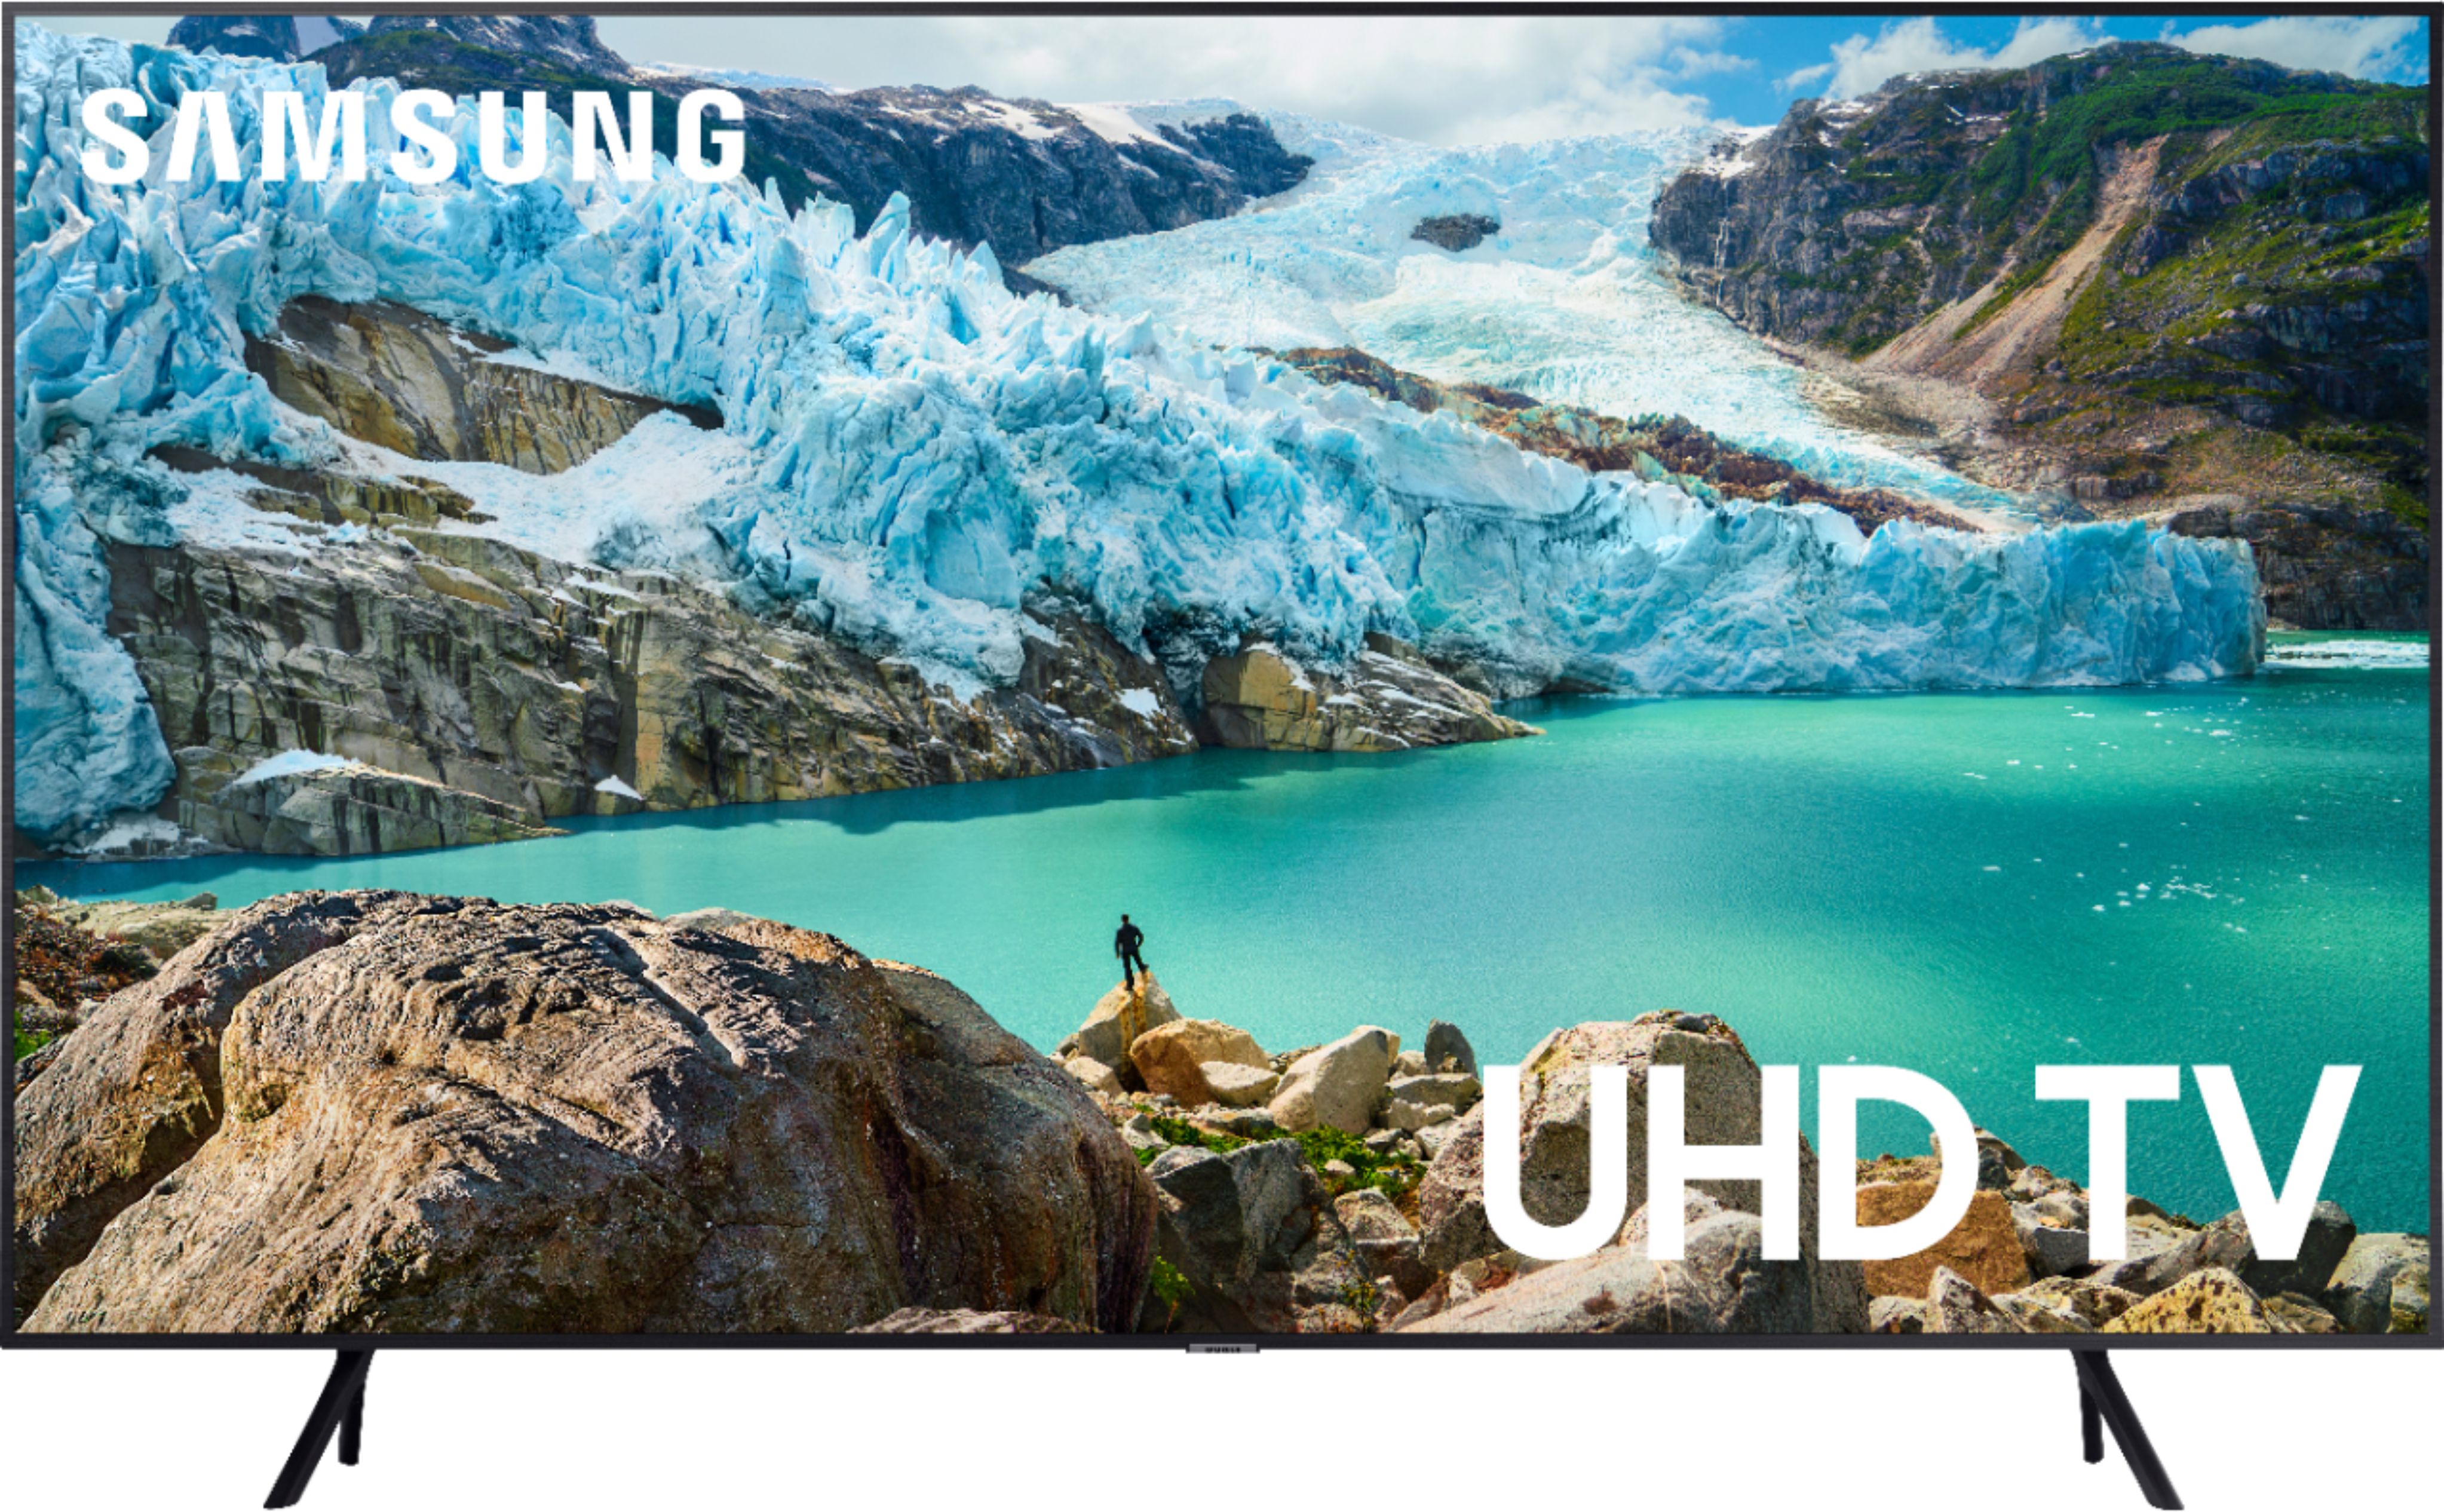 Samsung - 70" Class - LED - 6 Series - 2160p - Smart - 4K UHD TV with HDR